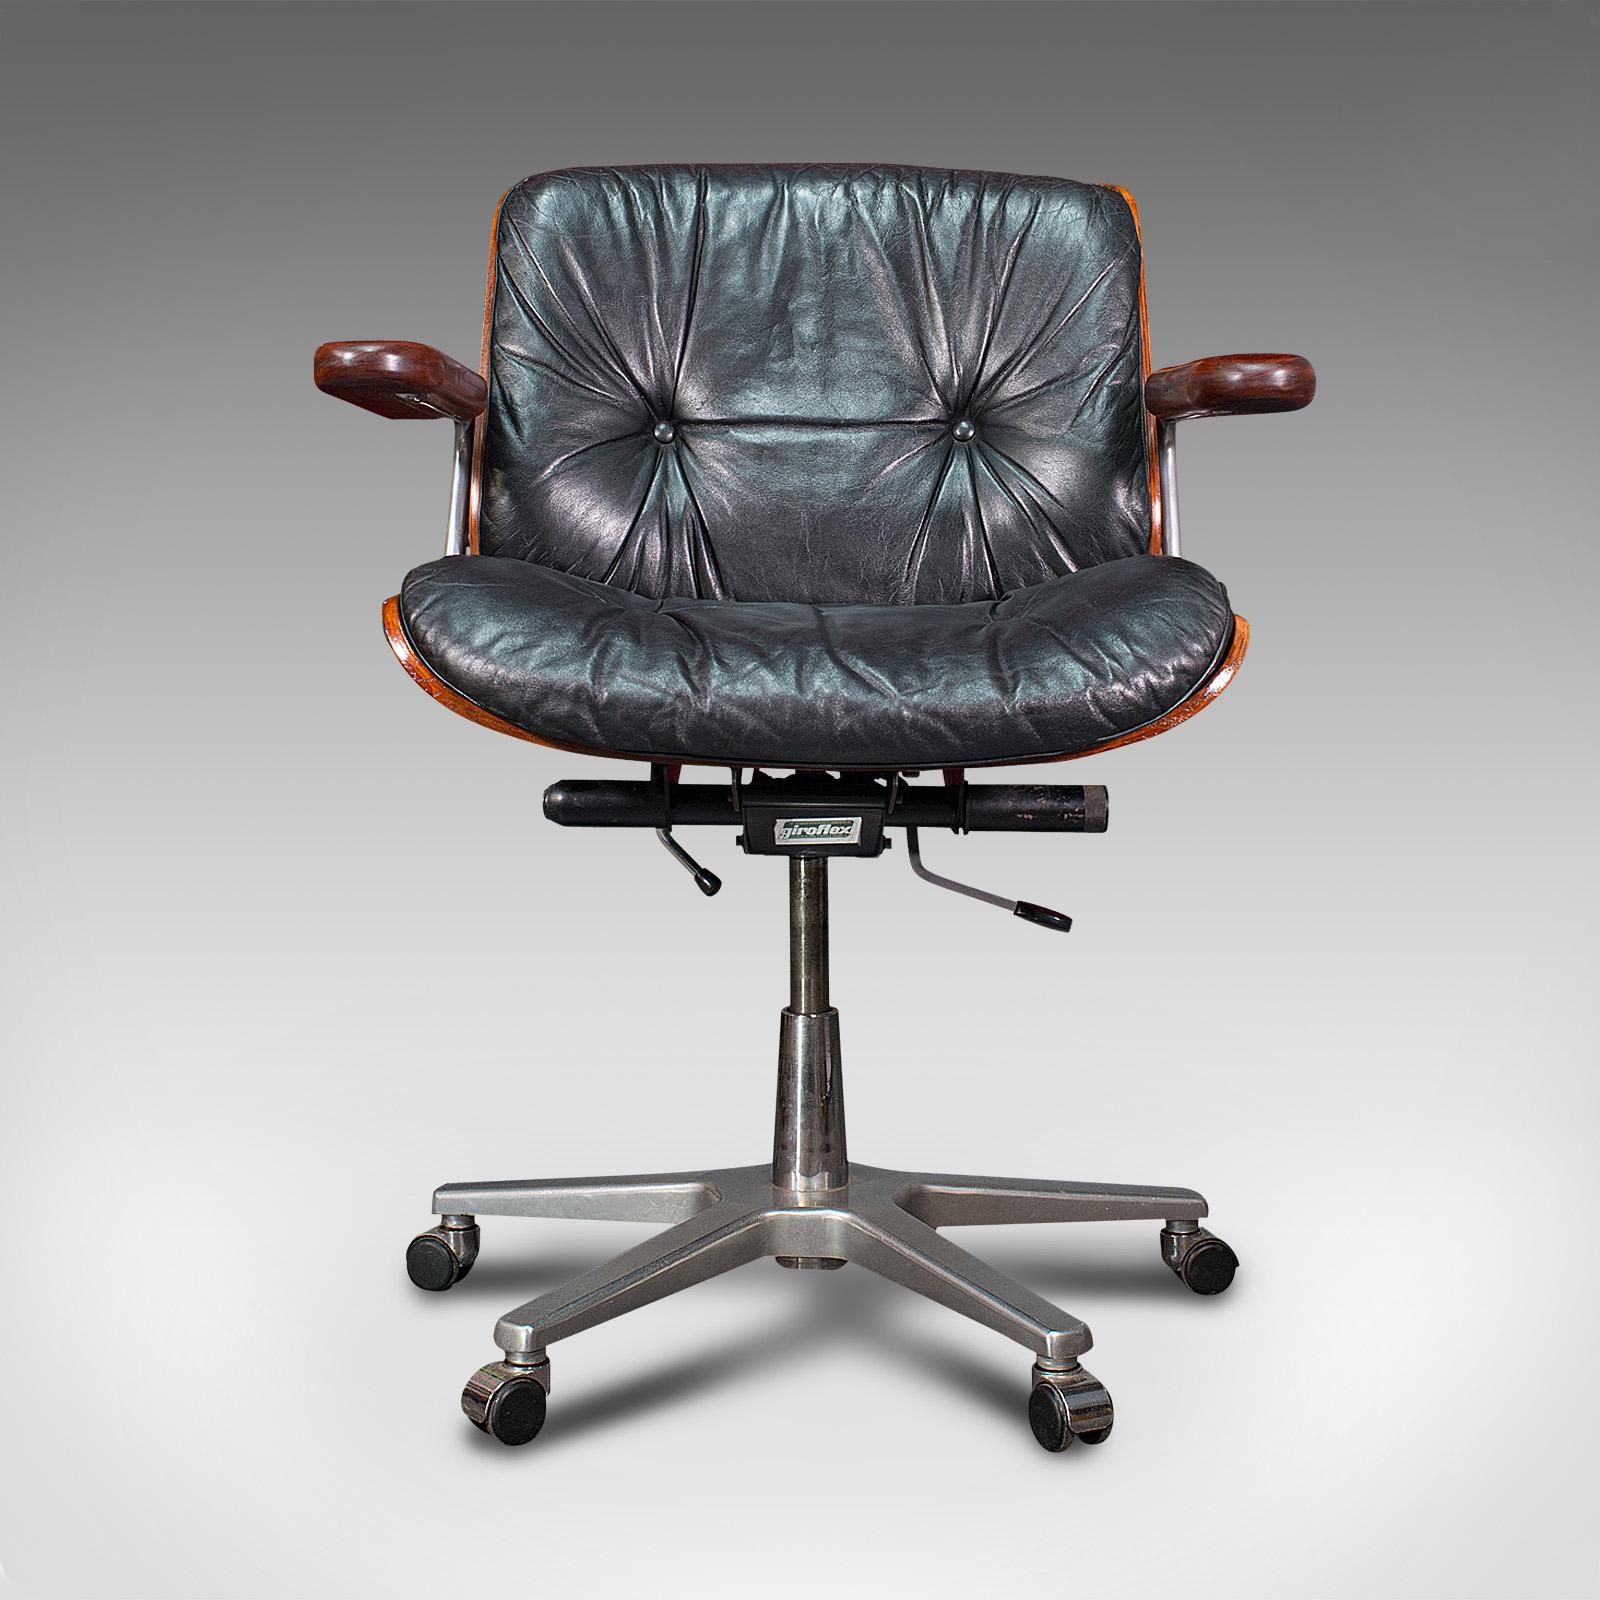 This is a vintage Giroflex desk chair. A Swiss, rosewood, teak and leather office seat by Karl Dittert for Martin Stoll, dating to the late 20th century, circa 1970.

Inviting example of late 20th century Swiss craftsmanship and design
Displays a